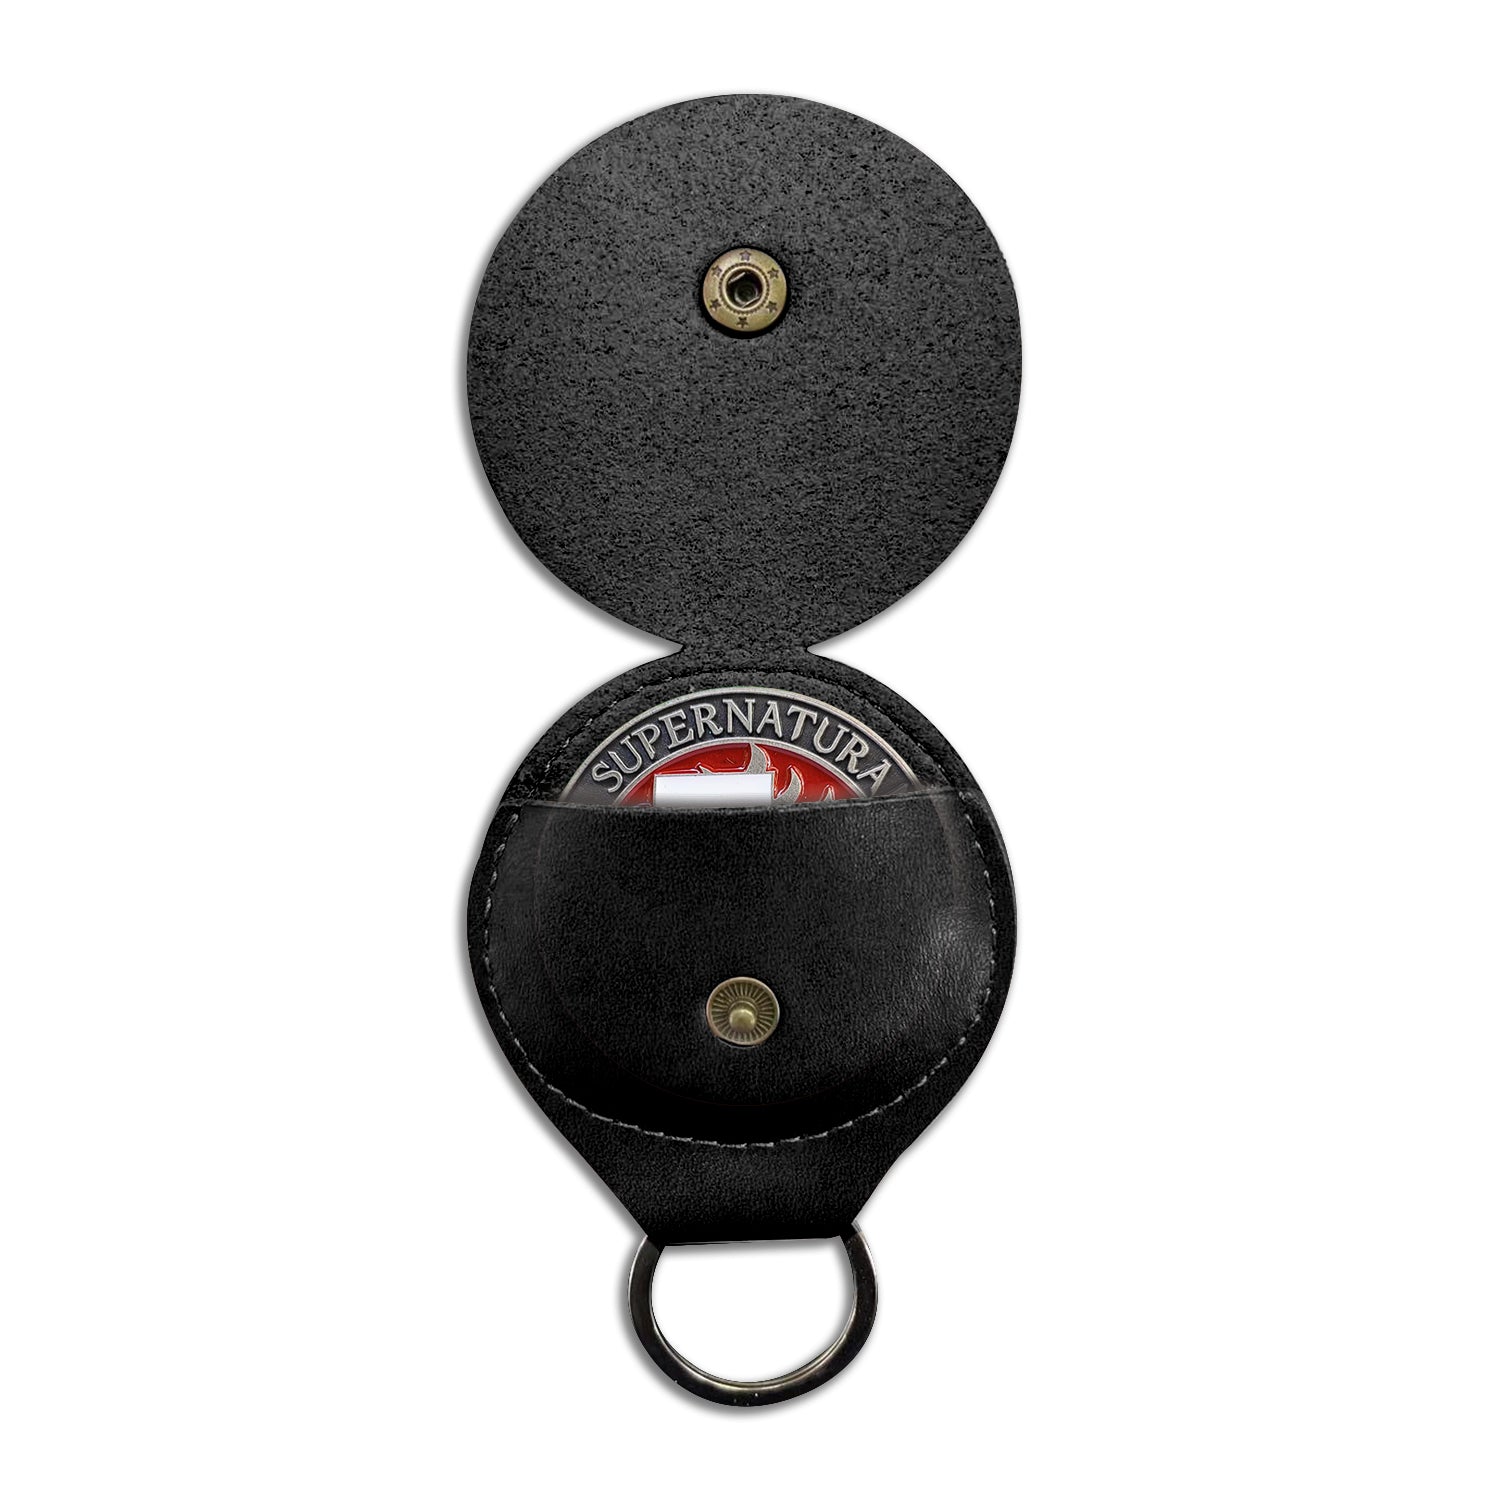 A round, black coin holder with a key ring, spread open. In the coin holder slot, the top edge of a brass coin is partially sticking out. A brass snap fastener is in the center of each section of the coin holder.